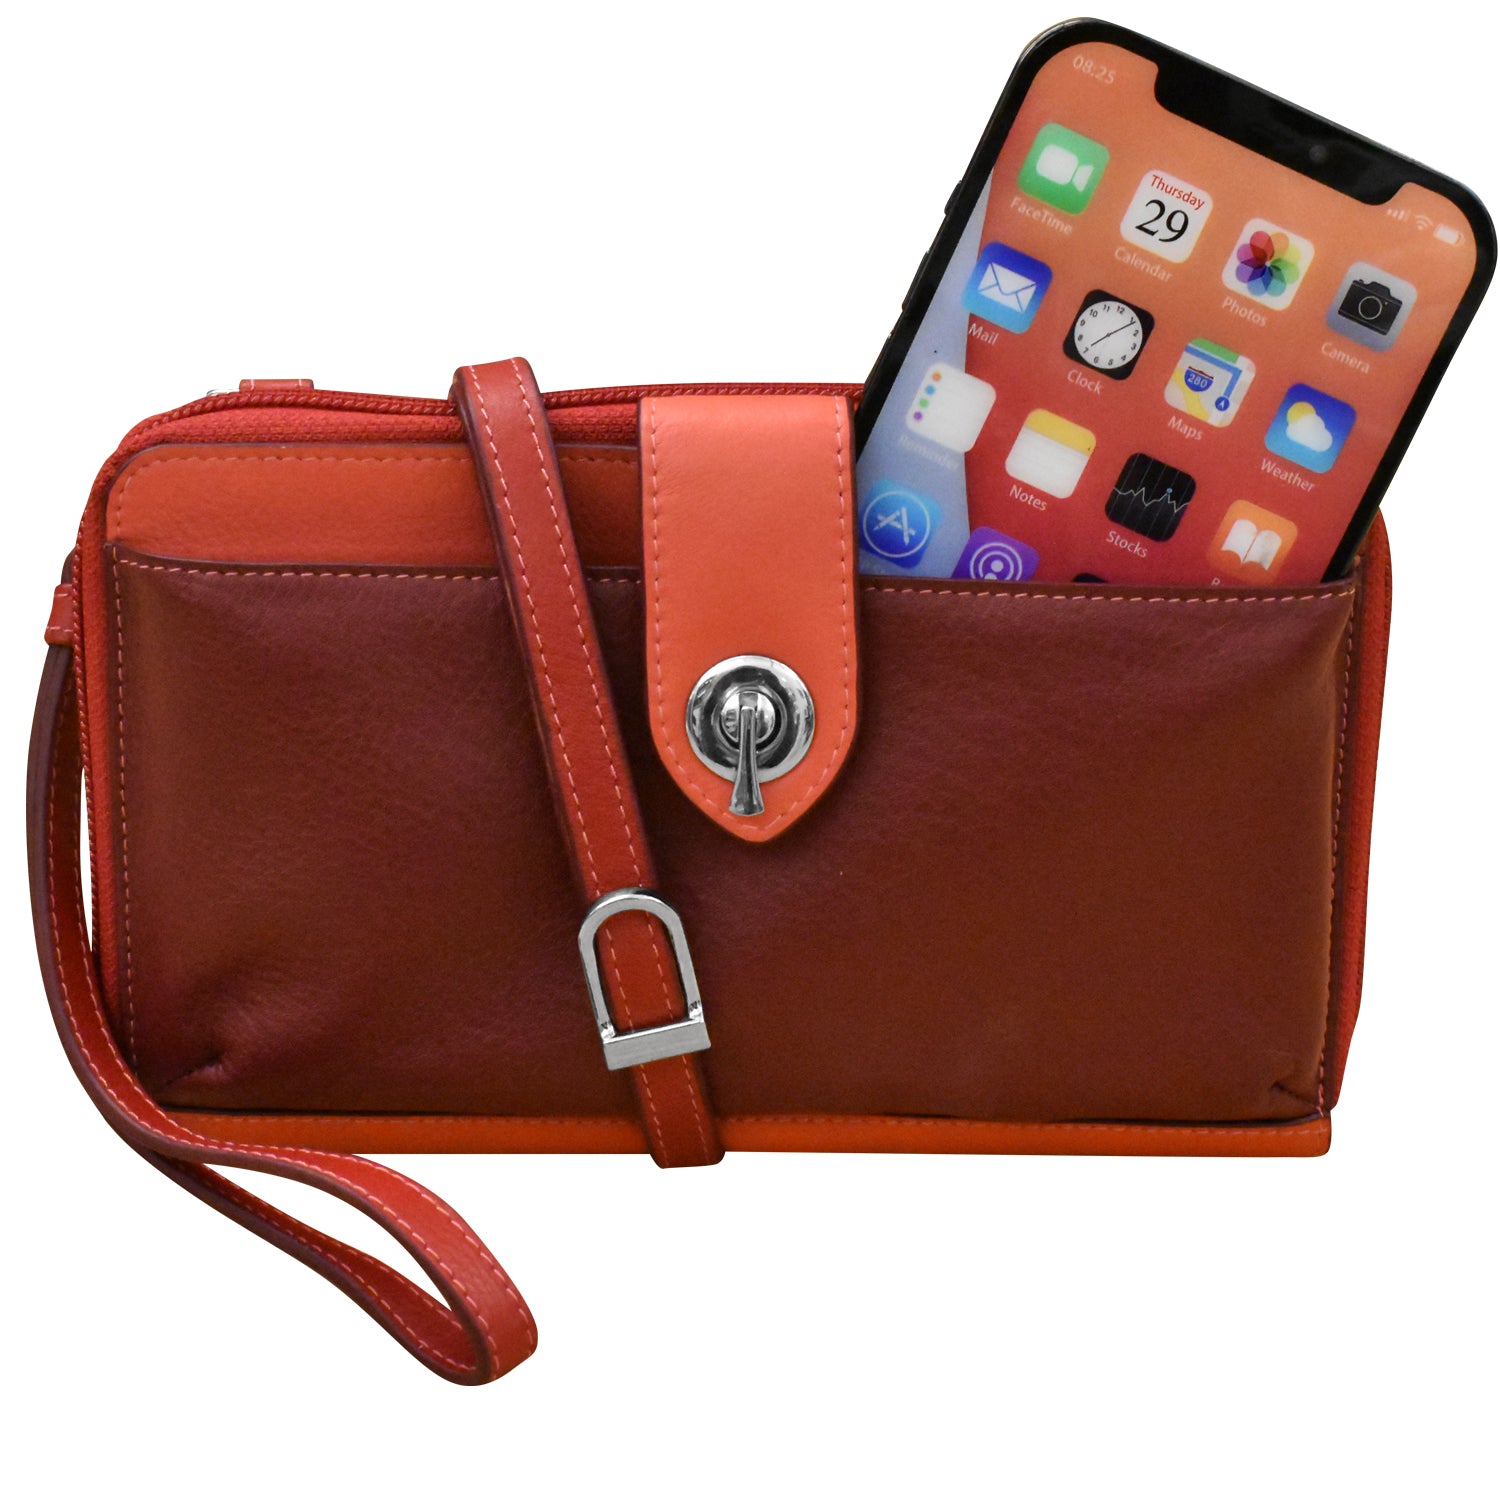 Buy Personalized Phone Purse, Leather Phone Case, Light Weight Purse, iPhone  Card Holder Wallet, Small Cross Body Bag, Touch Screen Phone Purse Online  in India - Etsy